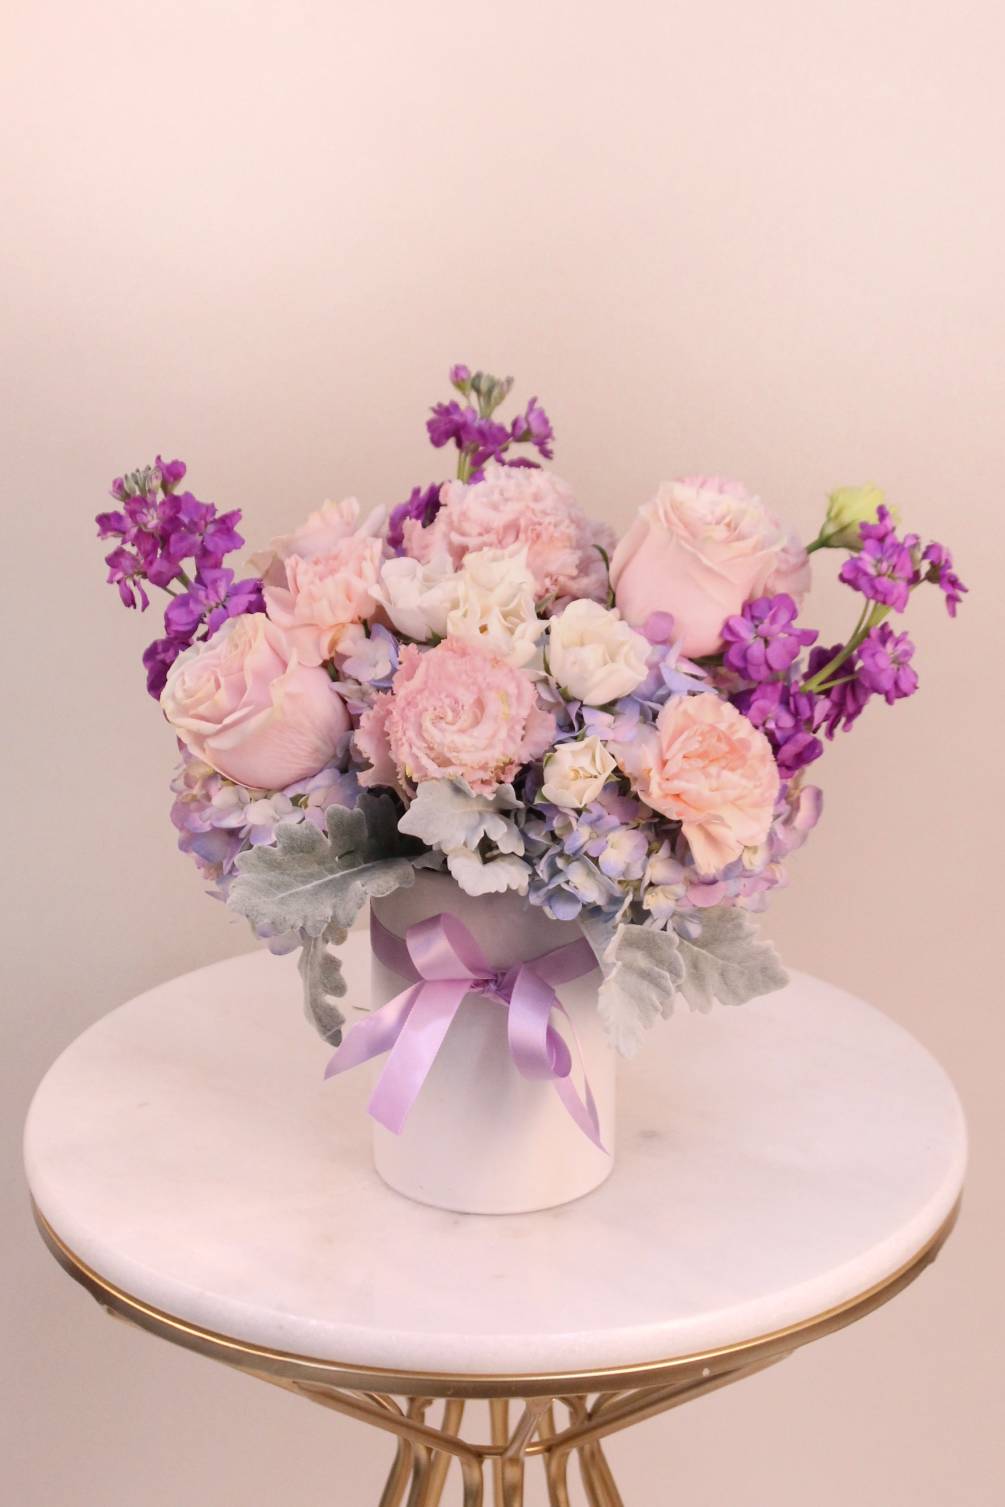 A beautiful shades of pastel flowers in lavender, blush and peach in